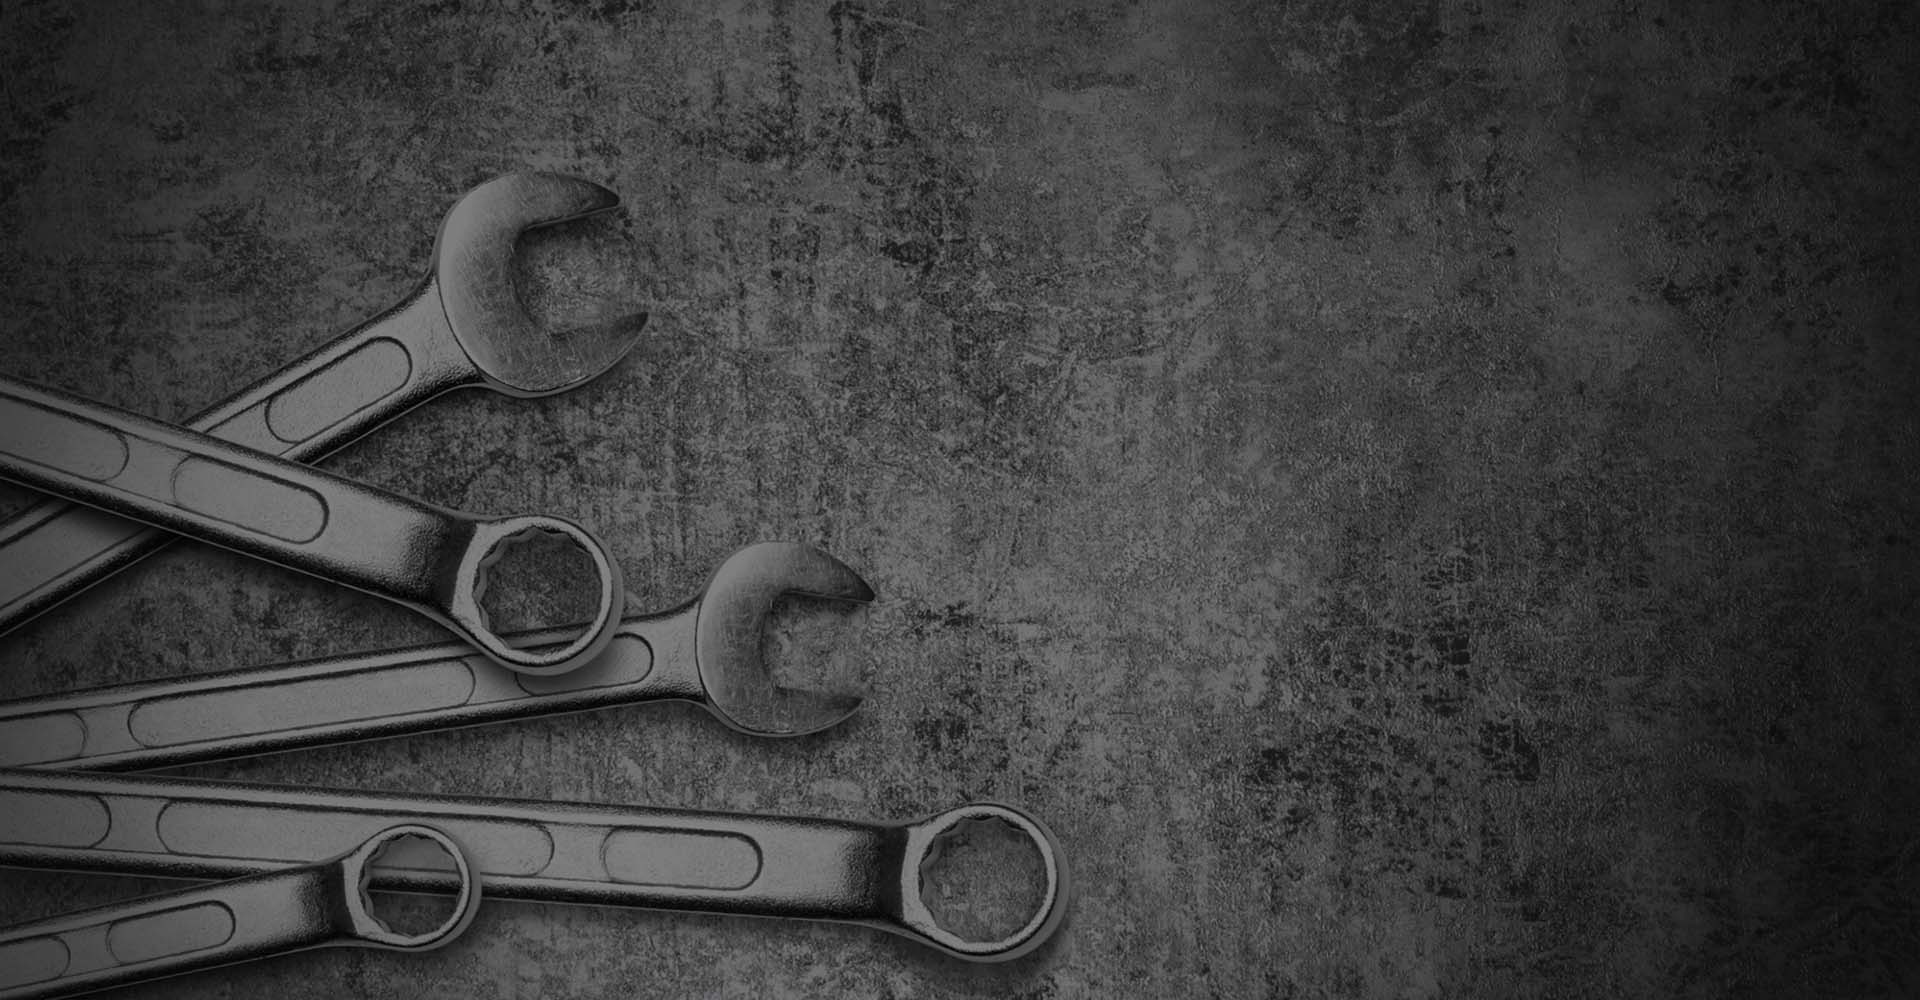 Tools on a grey background